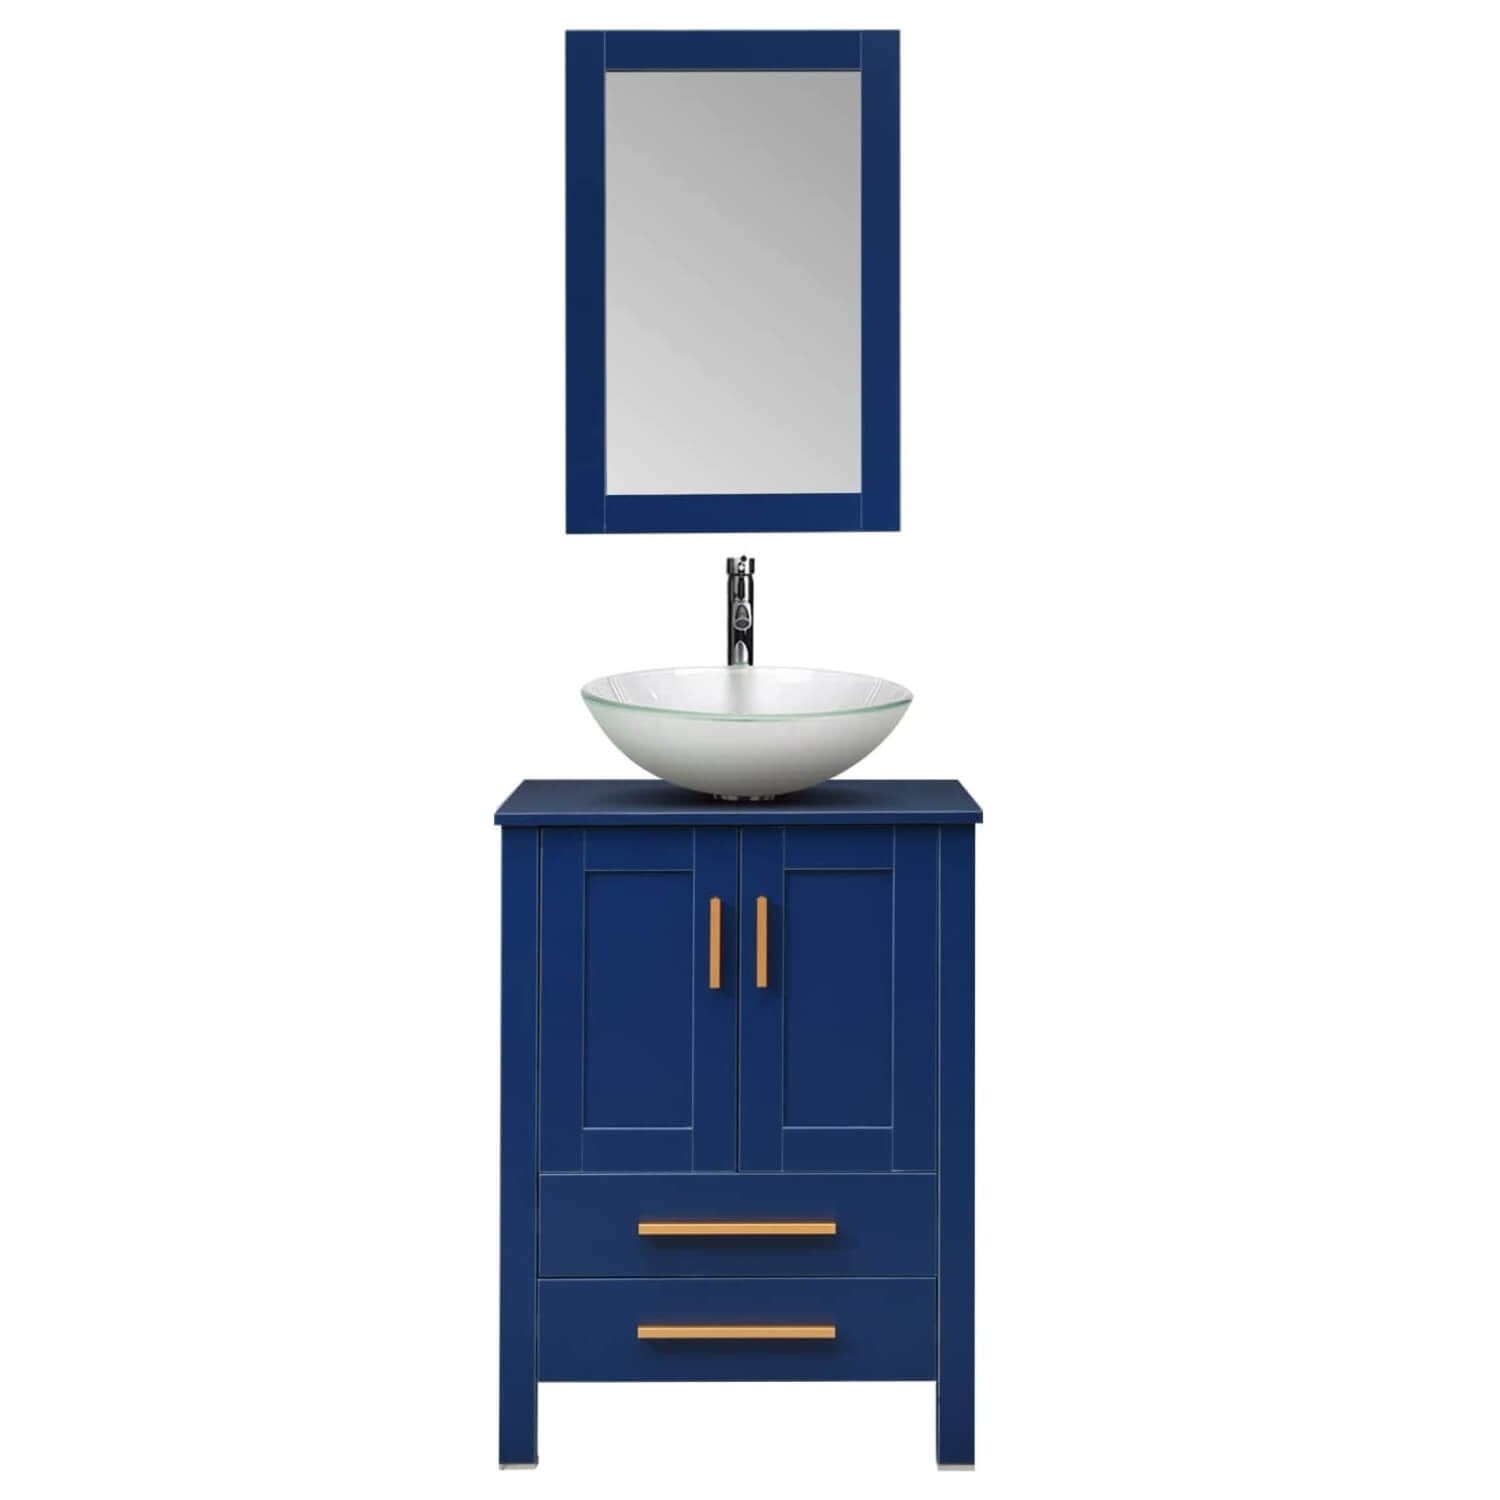 Elecwish vanity with frosted glass sink set with mirror